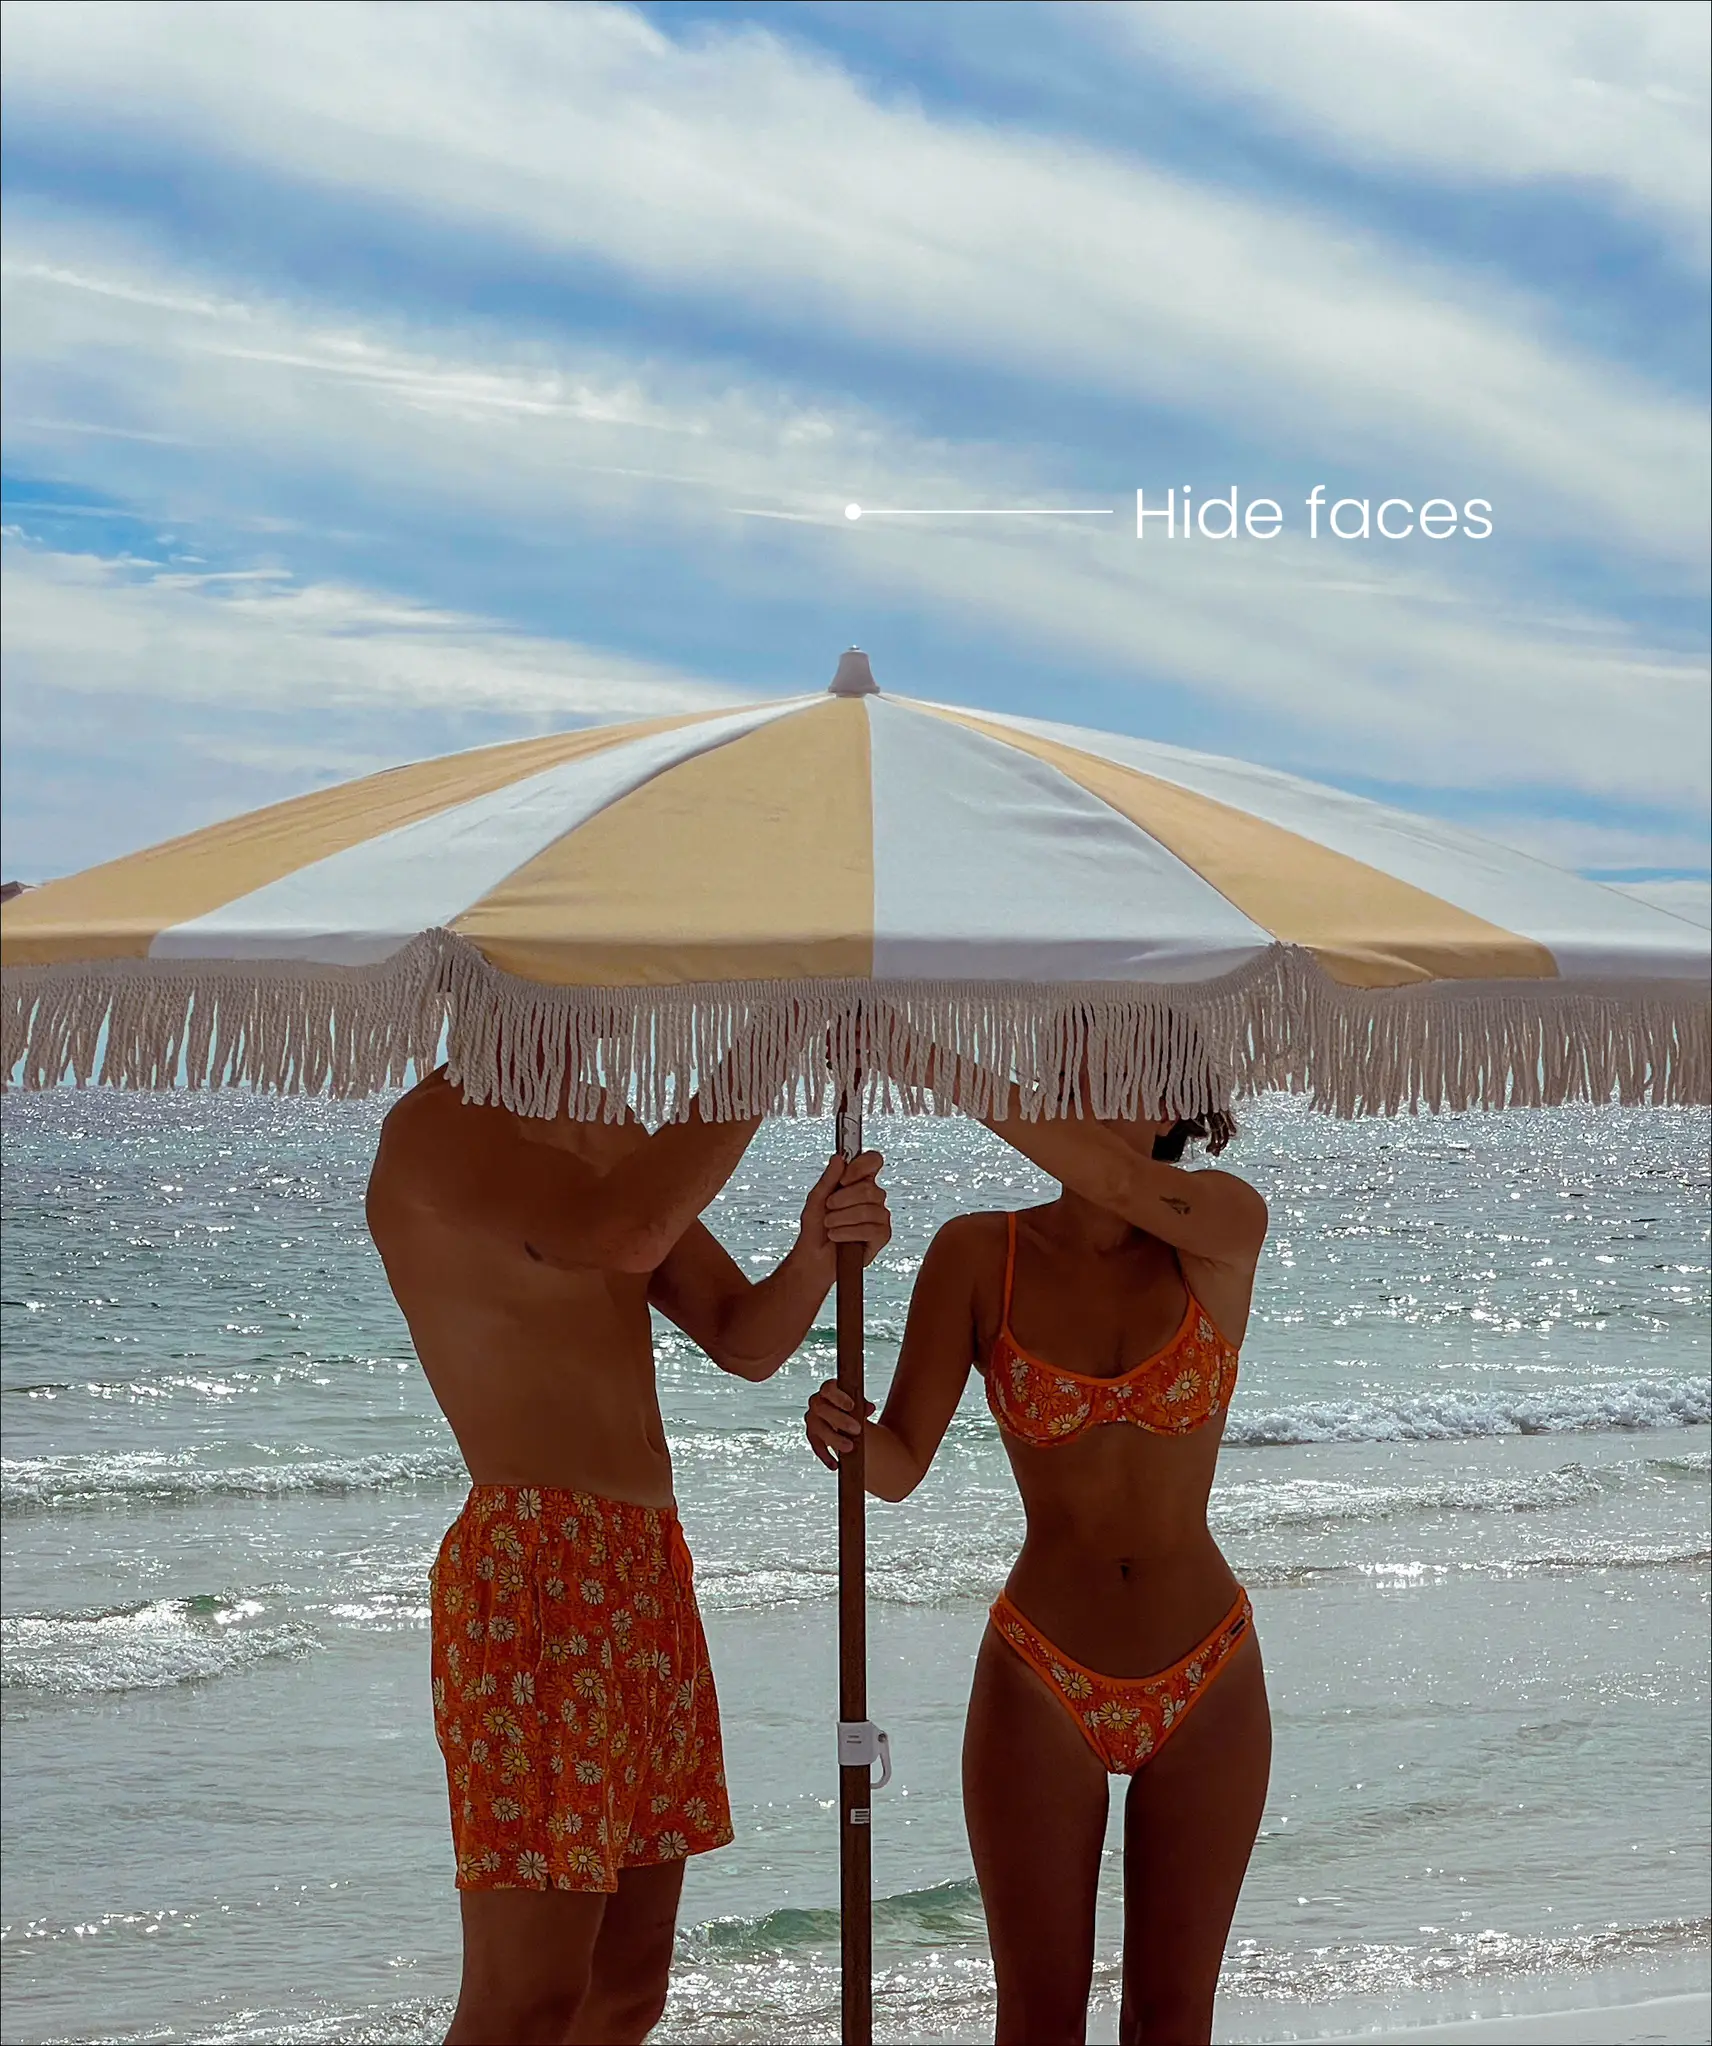  A man and a woman are standing on a beach, holding umbrellas to protect themselves from the sun. The woman is wearing a bikini and the man is wearing shorts.